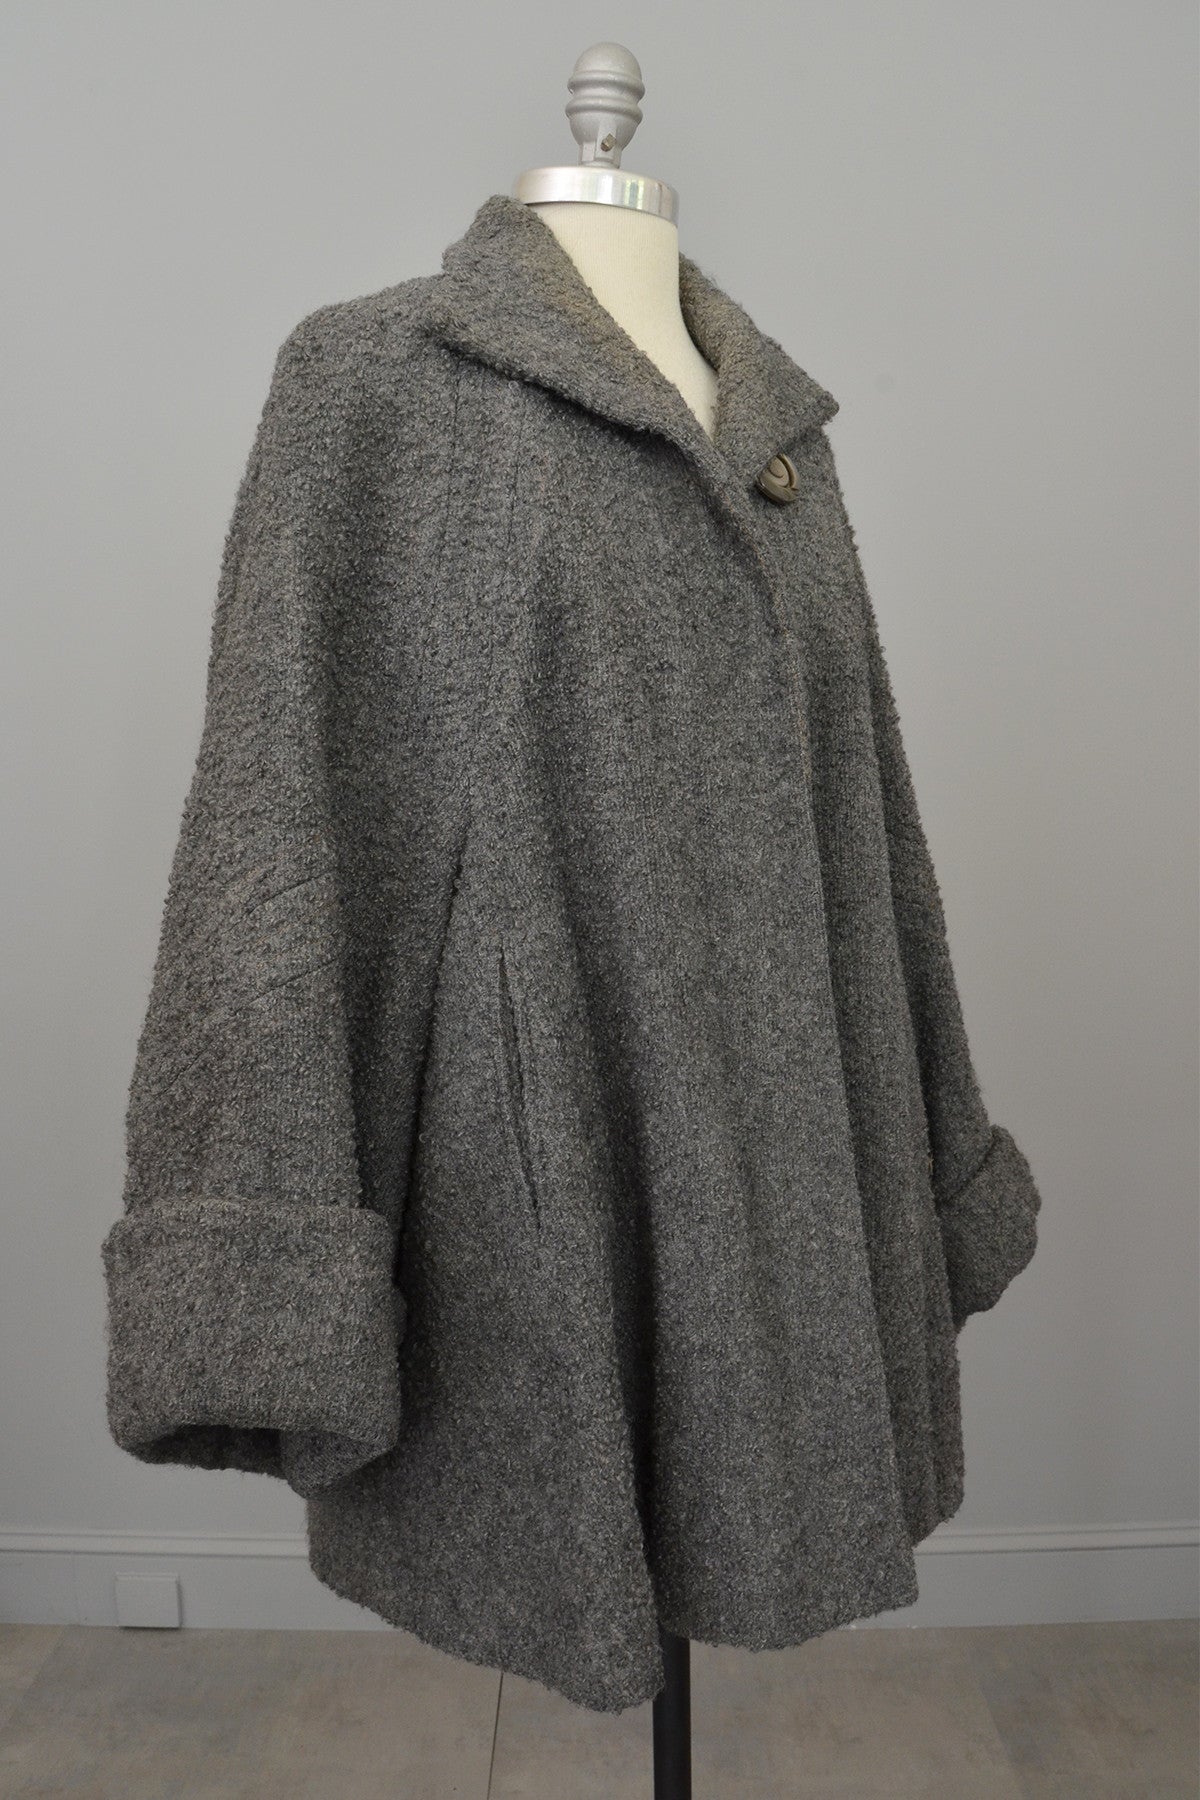 1940s Grey Boucle Swing Coat with Cuffed Bell Sleeves | VintageVirtuosa